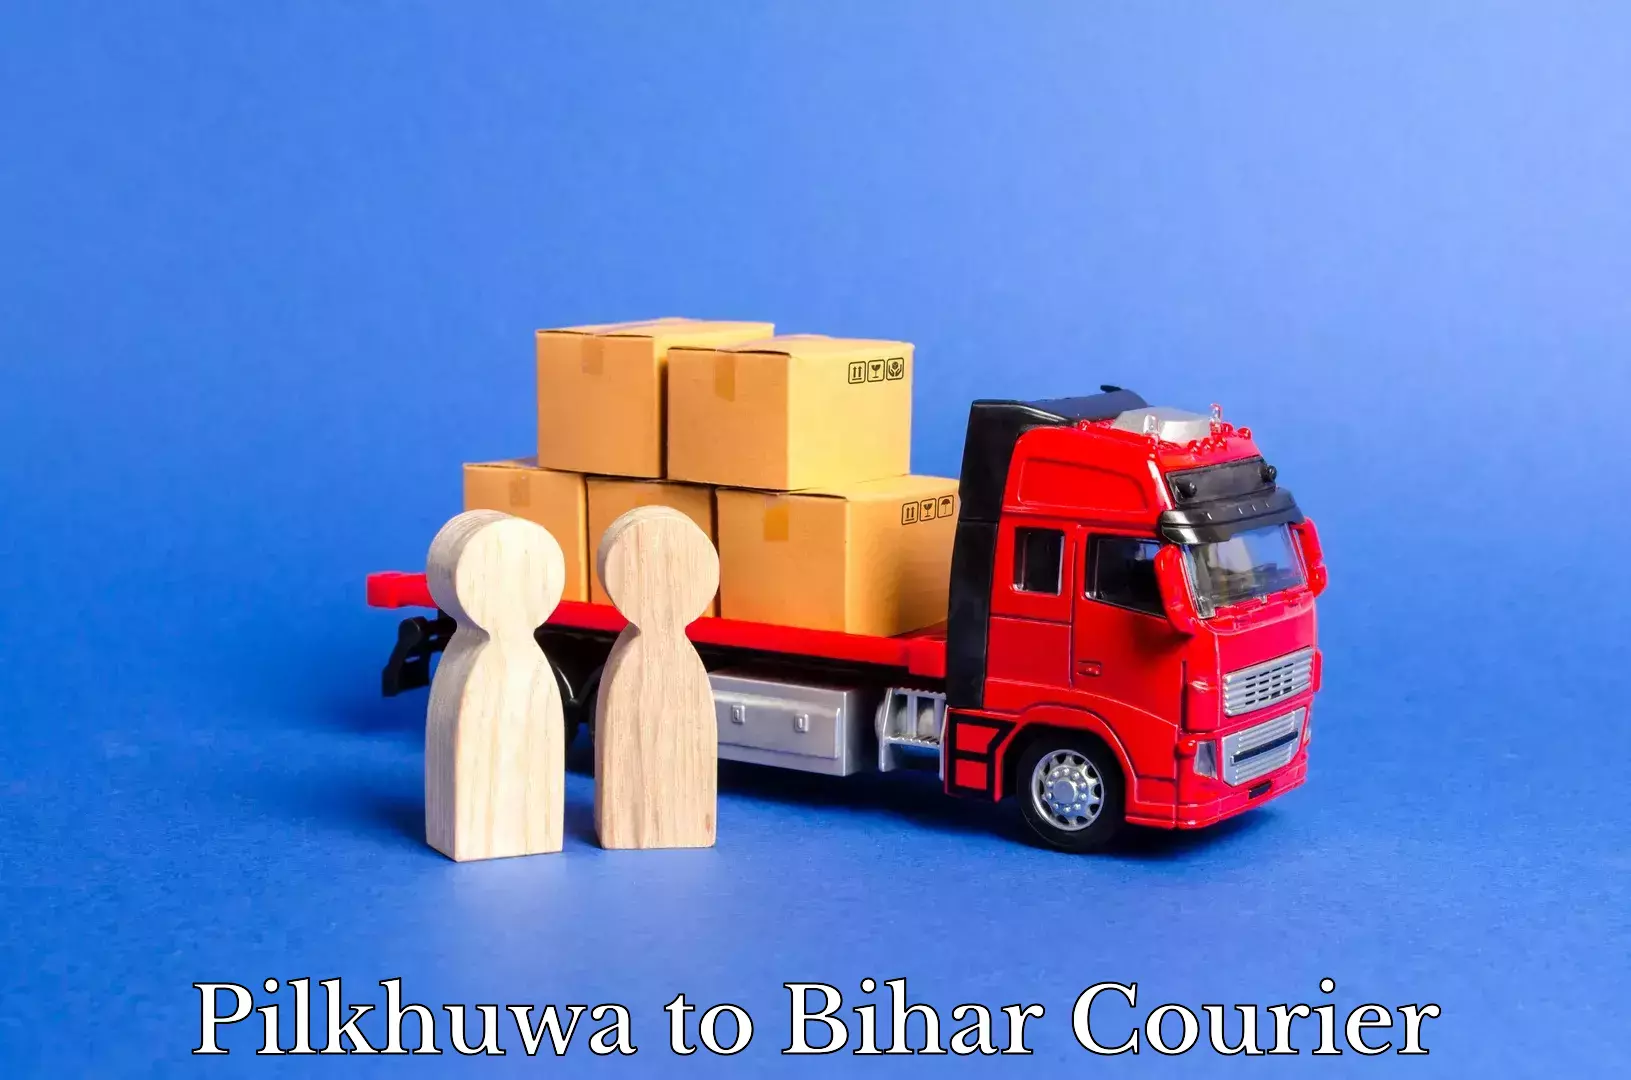 Cargo delivery service Pilkhuwa to Bihar